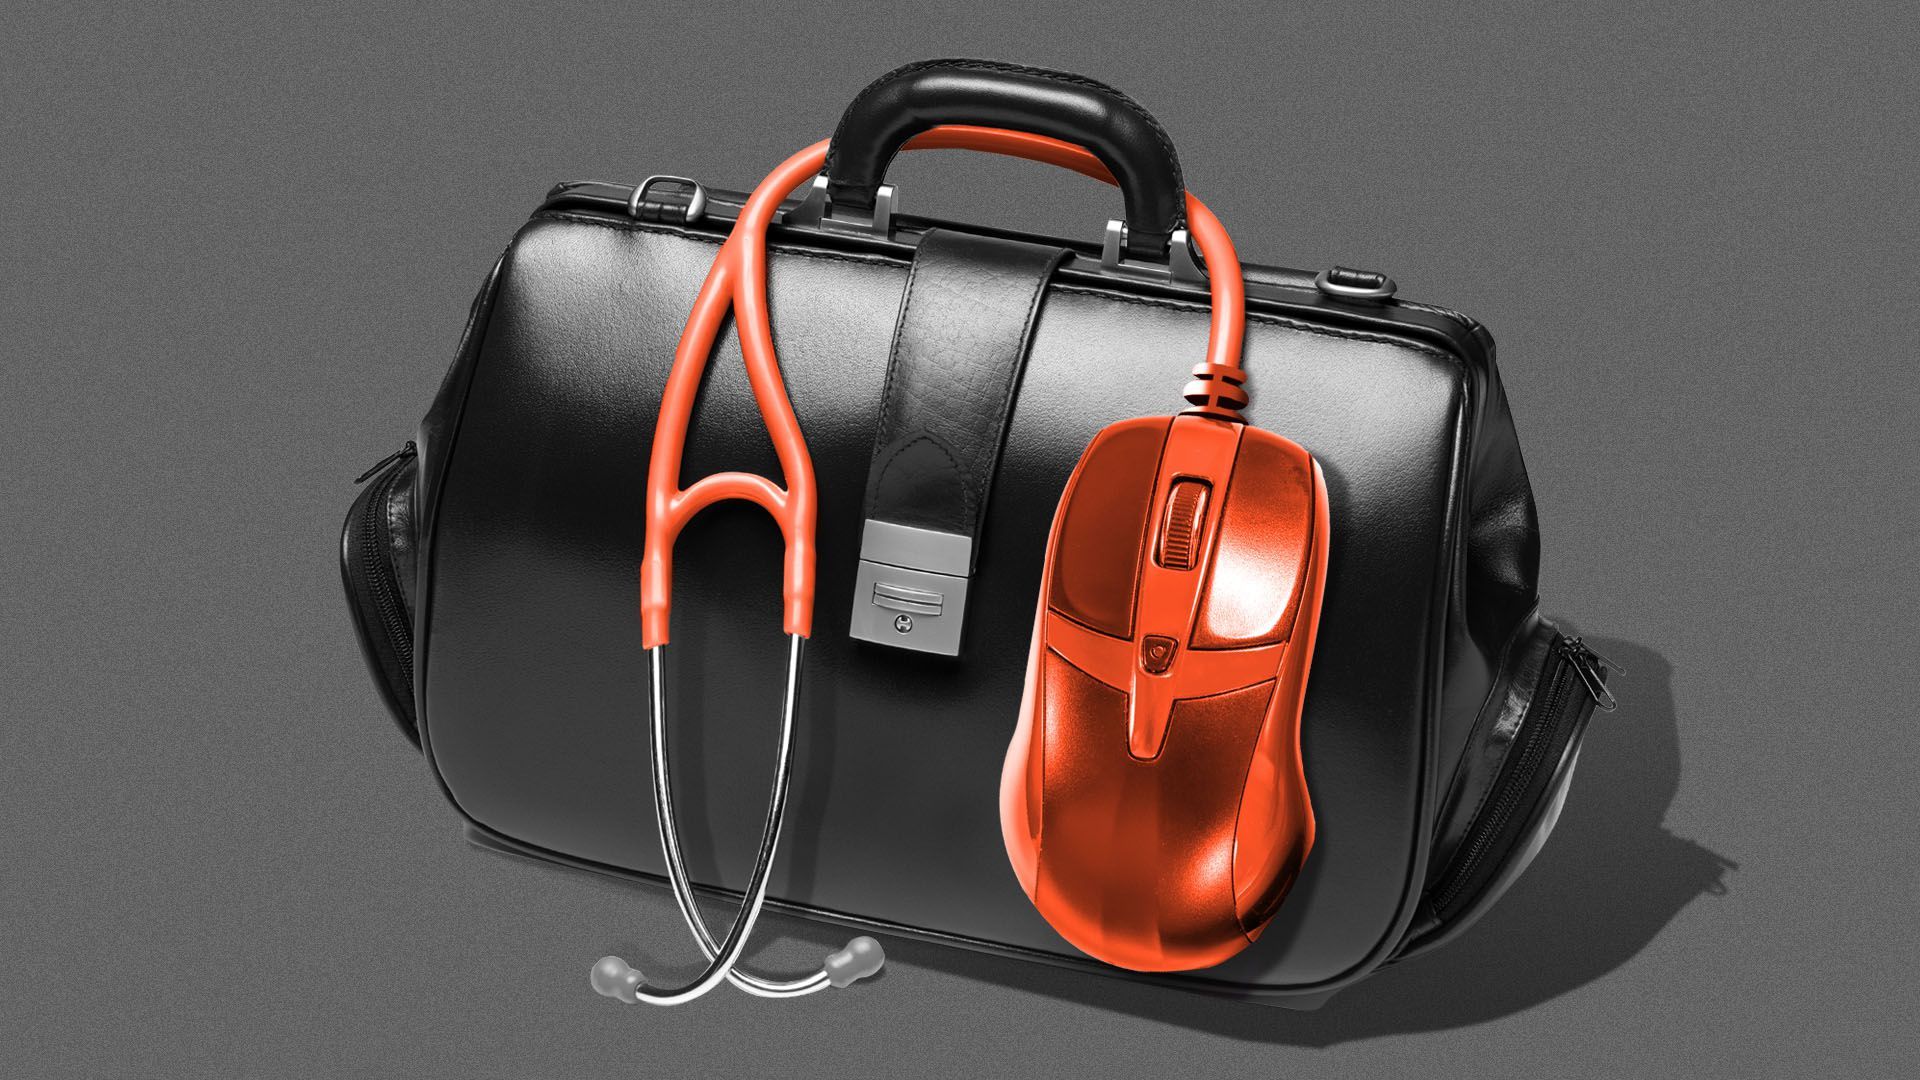 Illustration of a doctor's bag with stethoscope featuring a computer mouse at the end